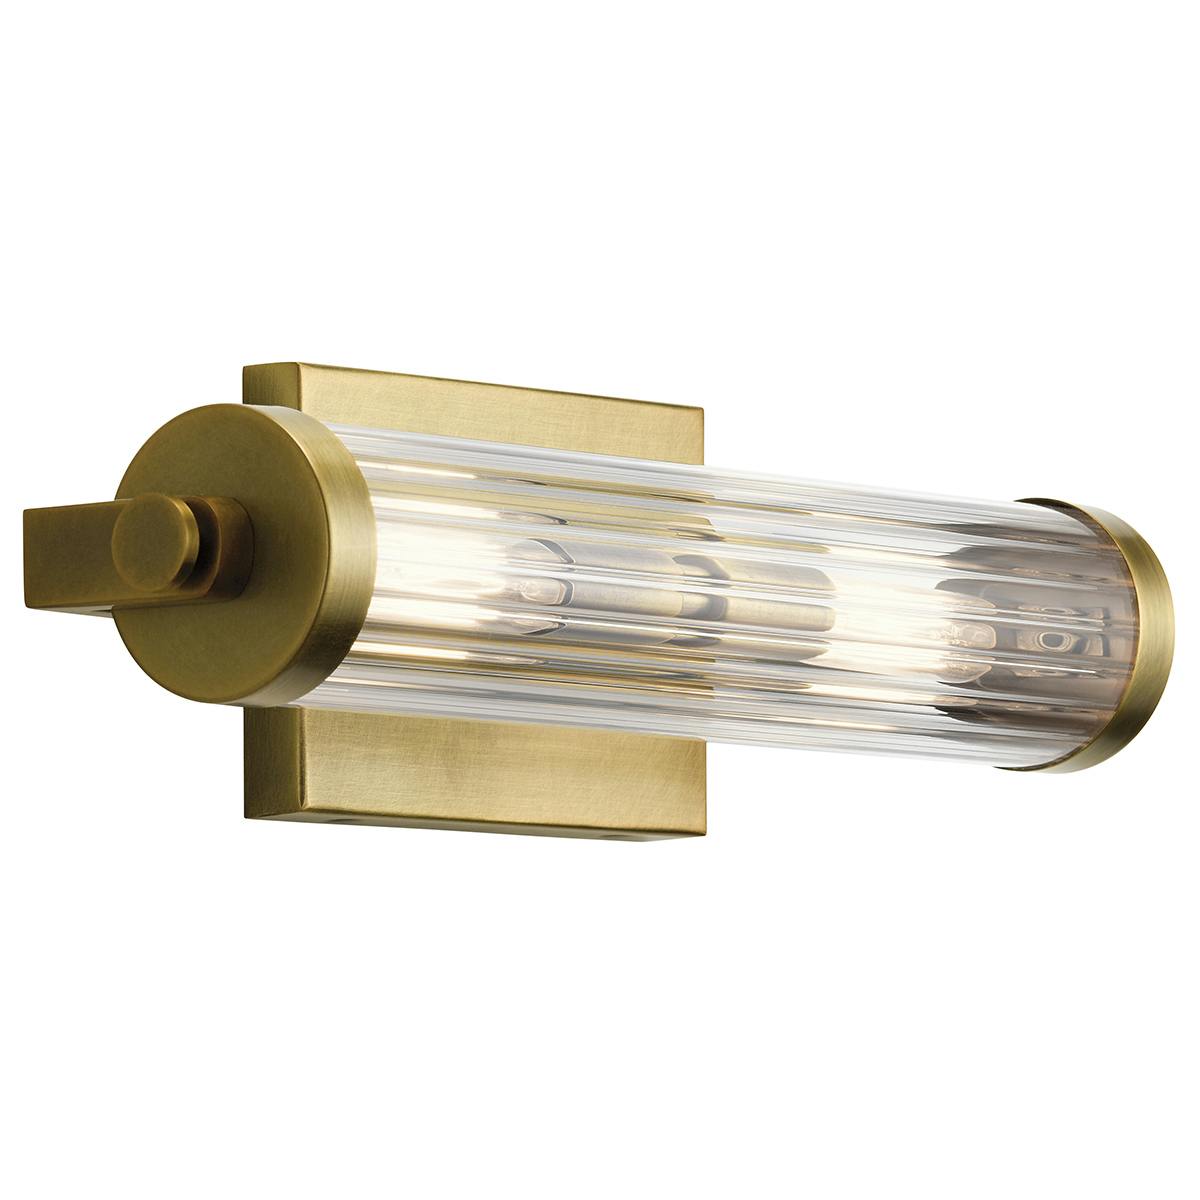 Azores 2 Light Wall Sconce Natural Brass on a white background